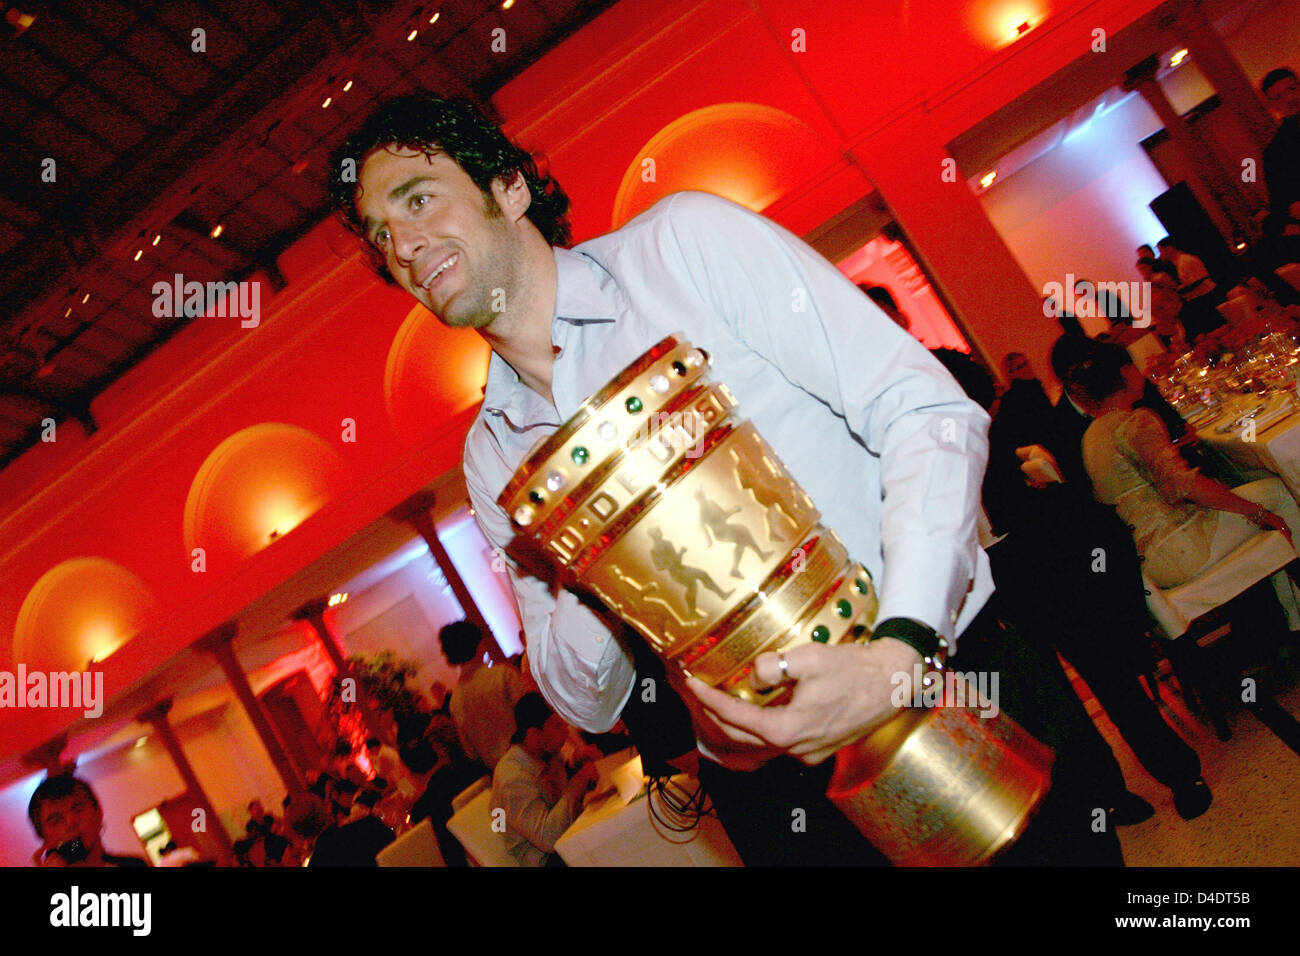 Luca Toni of Bayern Munic poses with the DFB-Trophy during the Bayern Munich champions party after the DFB Cup Final match between Borussia Dortmund and FC Bayern Munich at the Deutsche Telekom Represantive House Berlin, Germany, in the early morning hours of 20 April 2008. Photo: Andreas Rentz Stock Photo